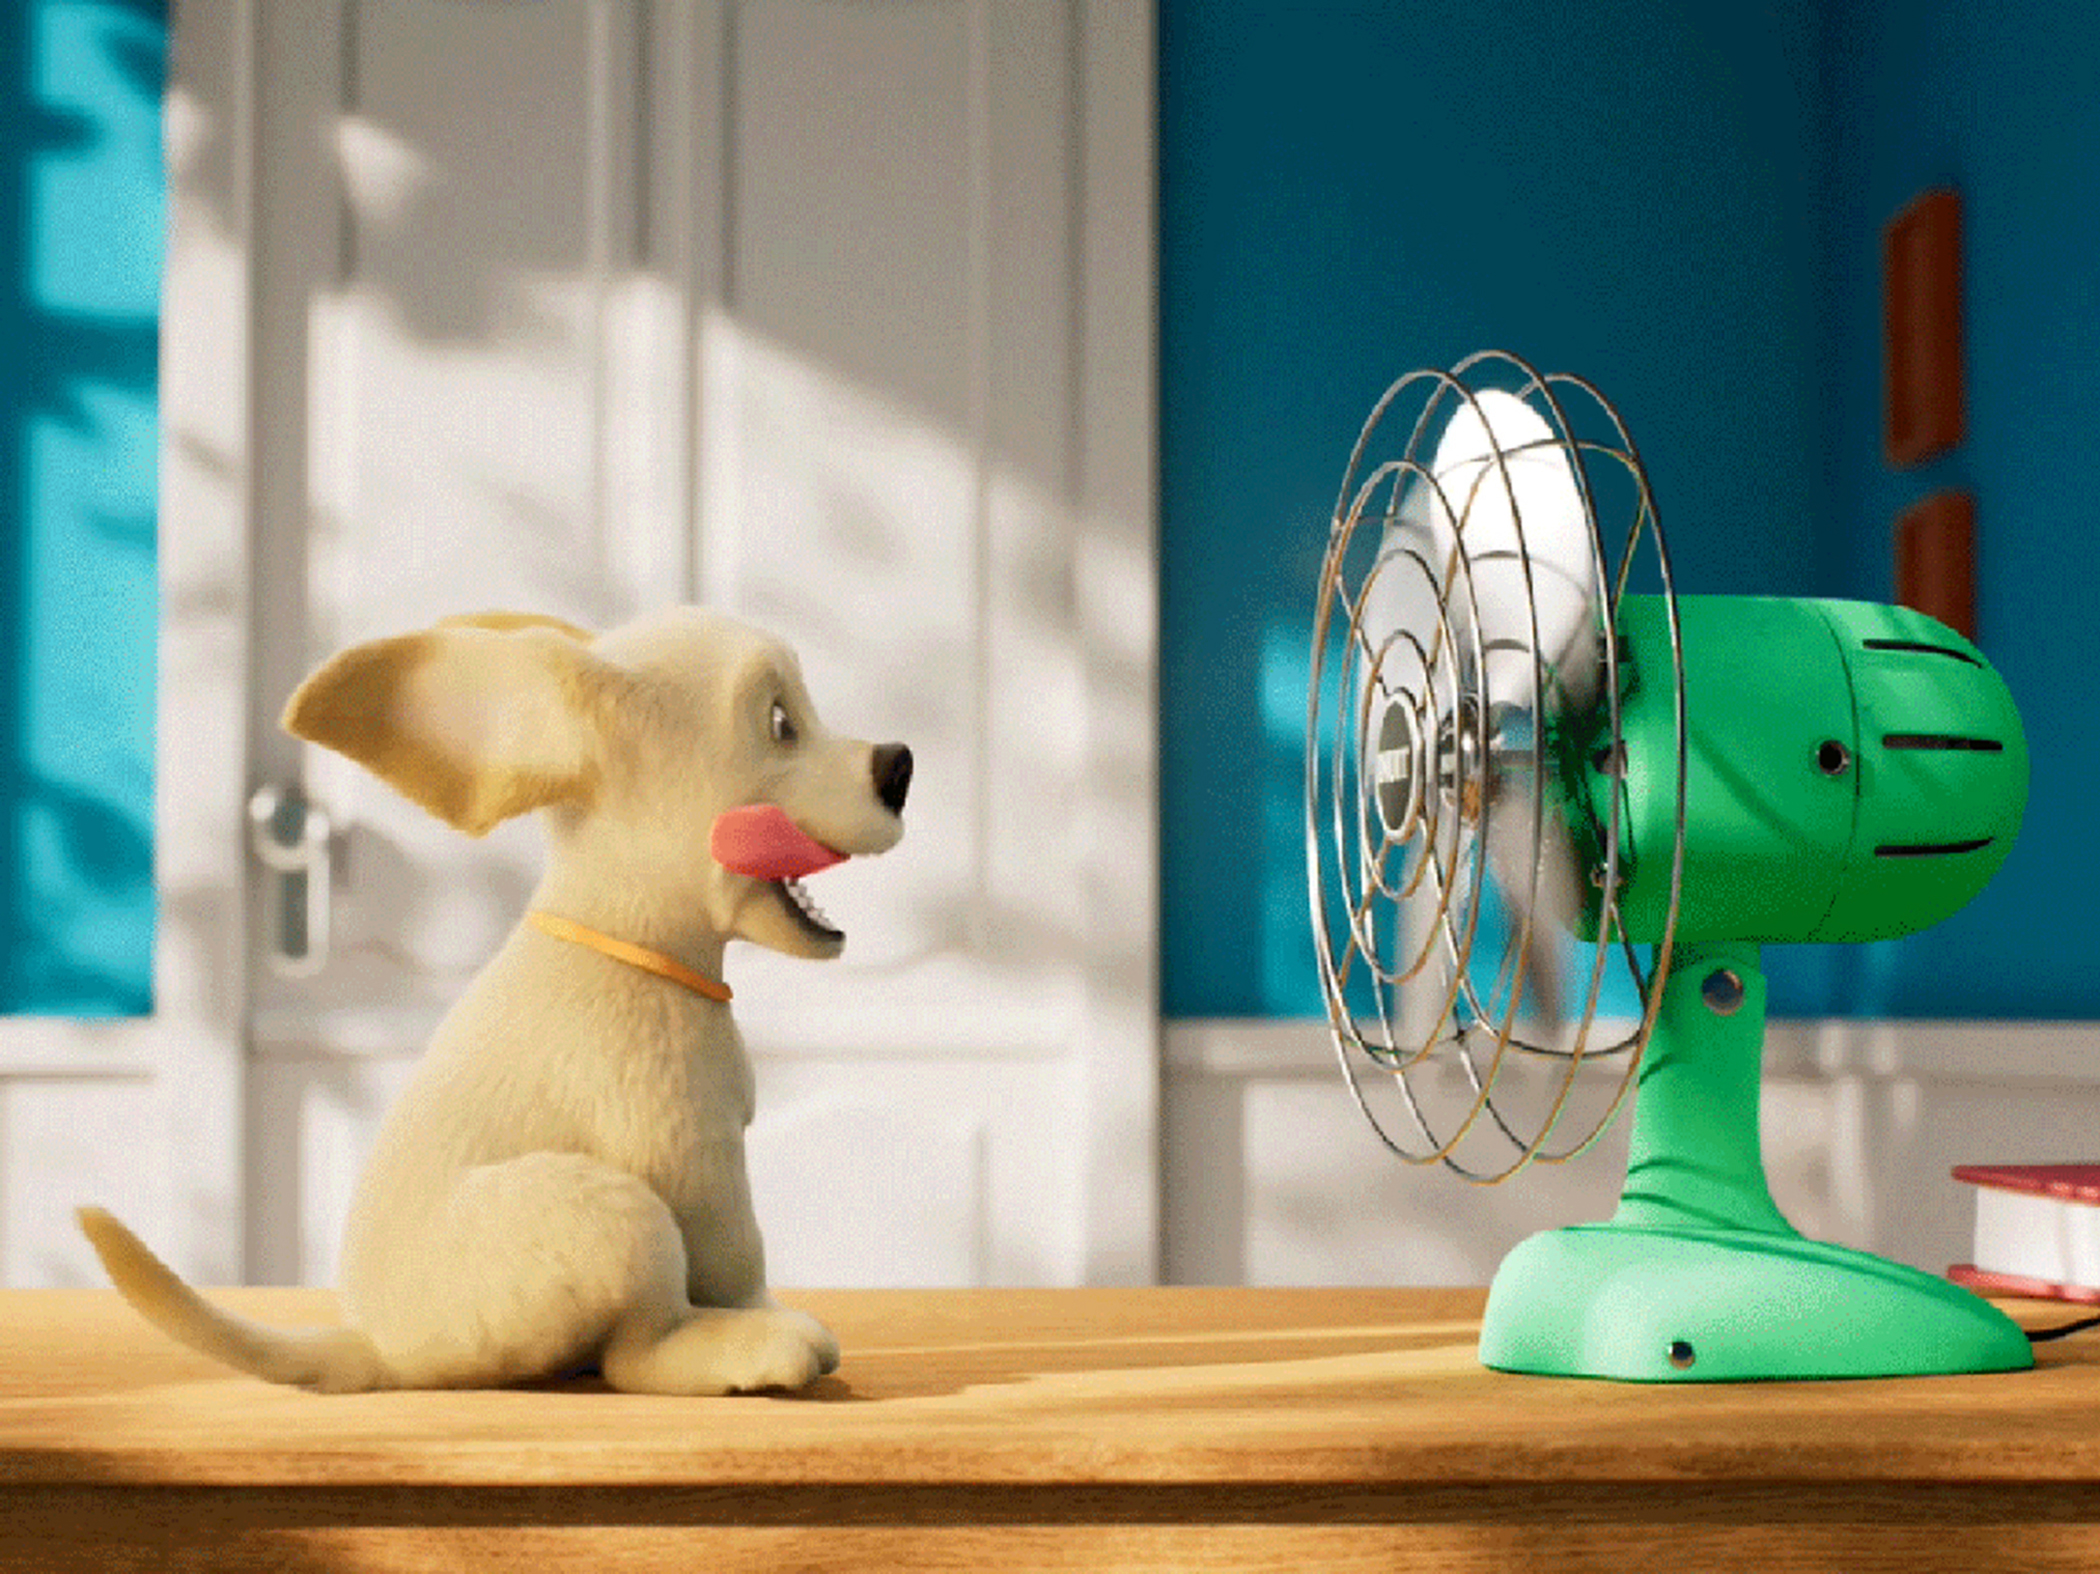 Animation picture of a room with a door in the background and a table. On the table is a puppy dog staring with his tongue out and ears flapping in the air, looking happily at a moving fan.